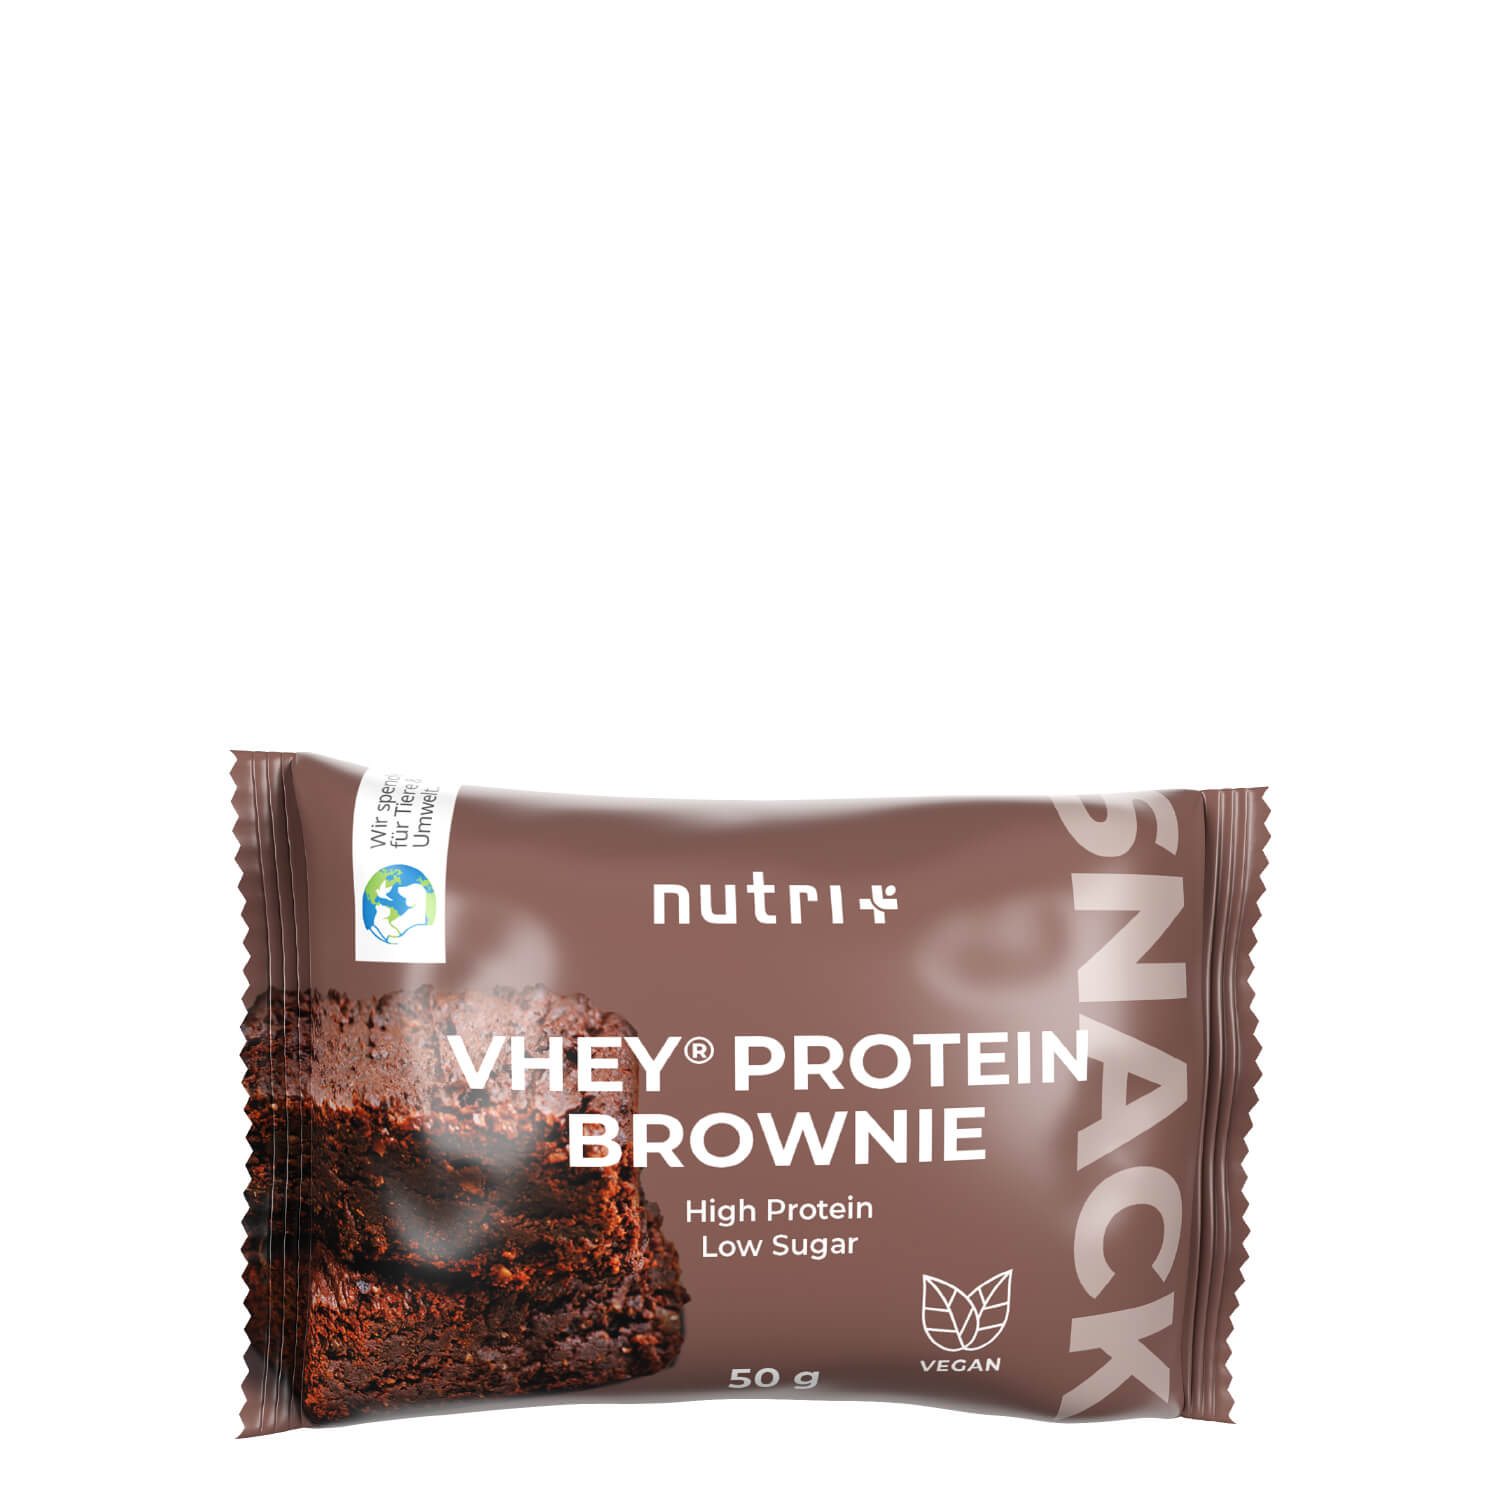 VHEY® Protein Brownie